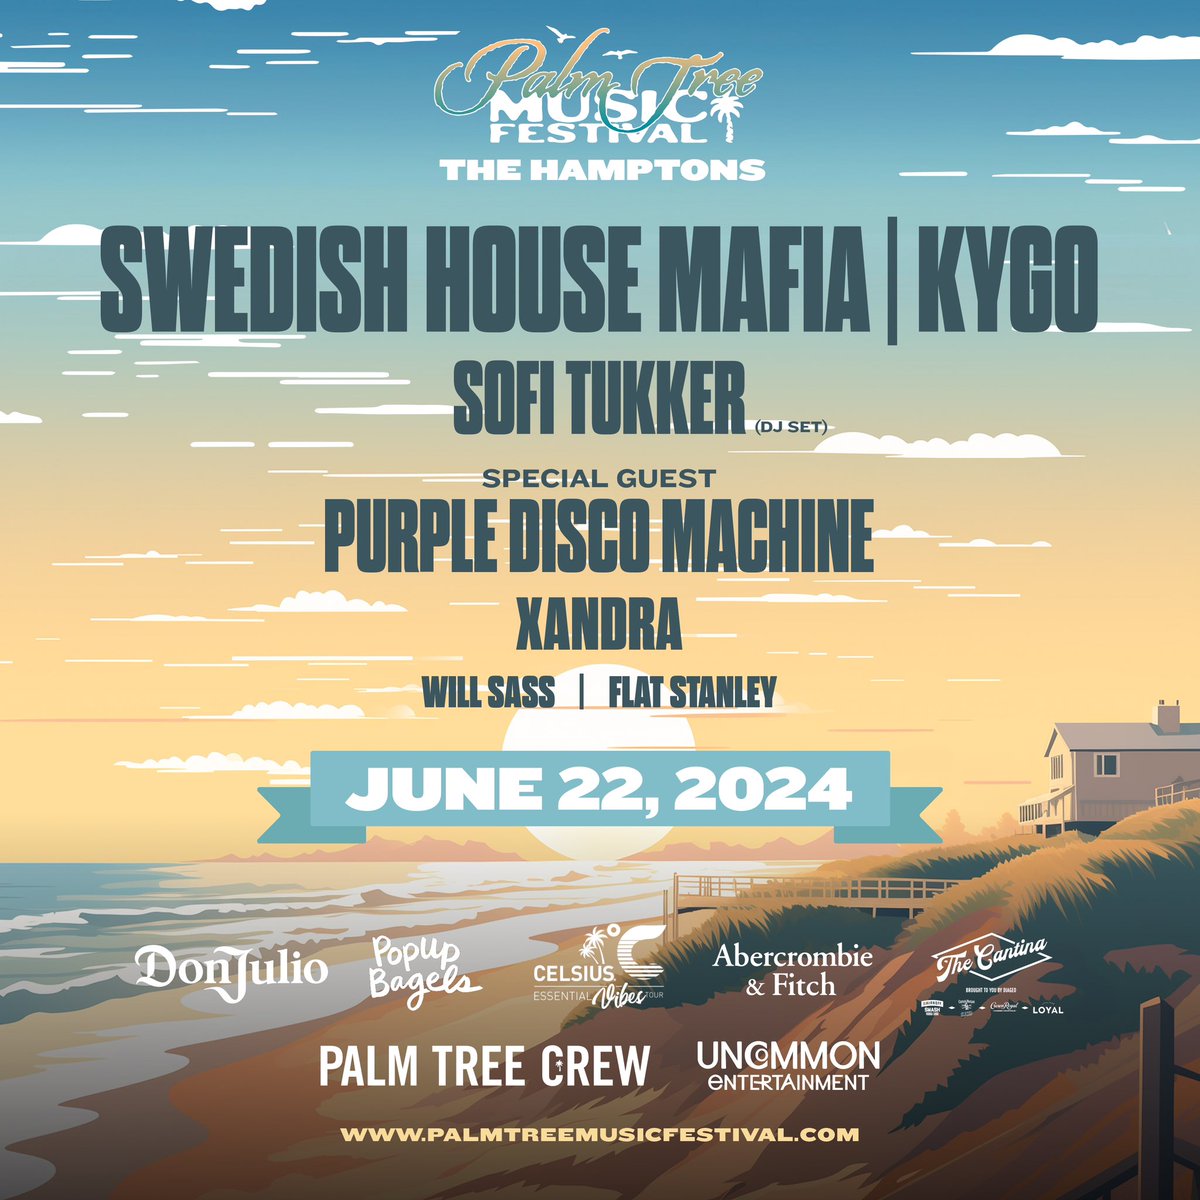 4 Years Strong! Palm Tree Festival is RETURNING to the Hamptons on June 22nd, 2024 with this stacked line up 👇 Sign up for the pre-sale here: palmtreemusicfestival.com/hamptons-sign-…